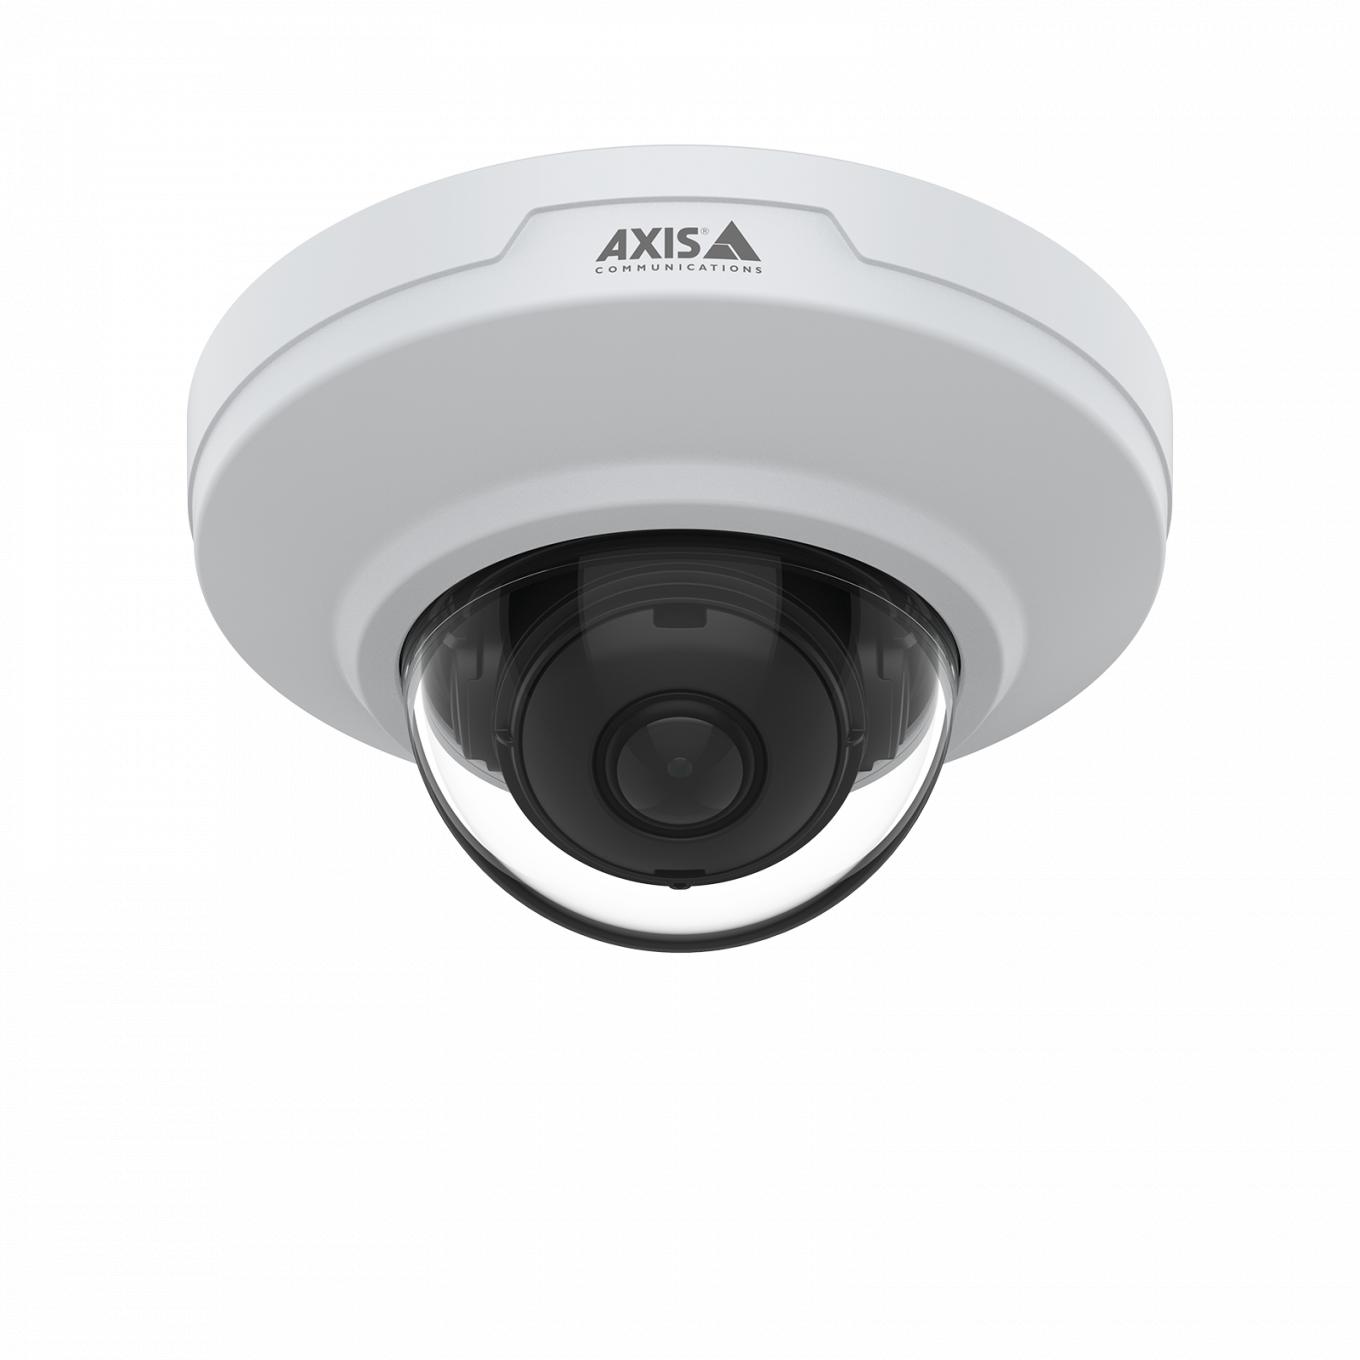 AXIS M3086-V Dome Camera | Axis Communications